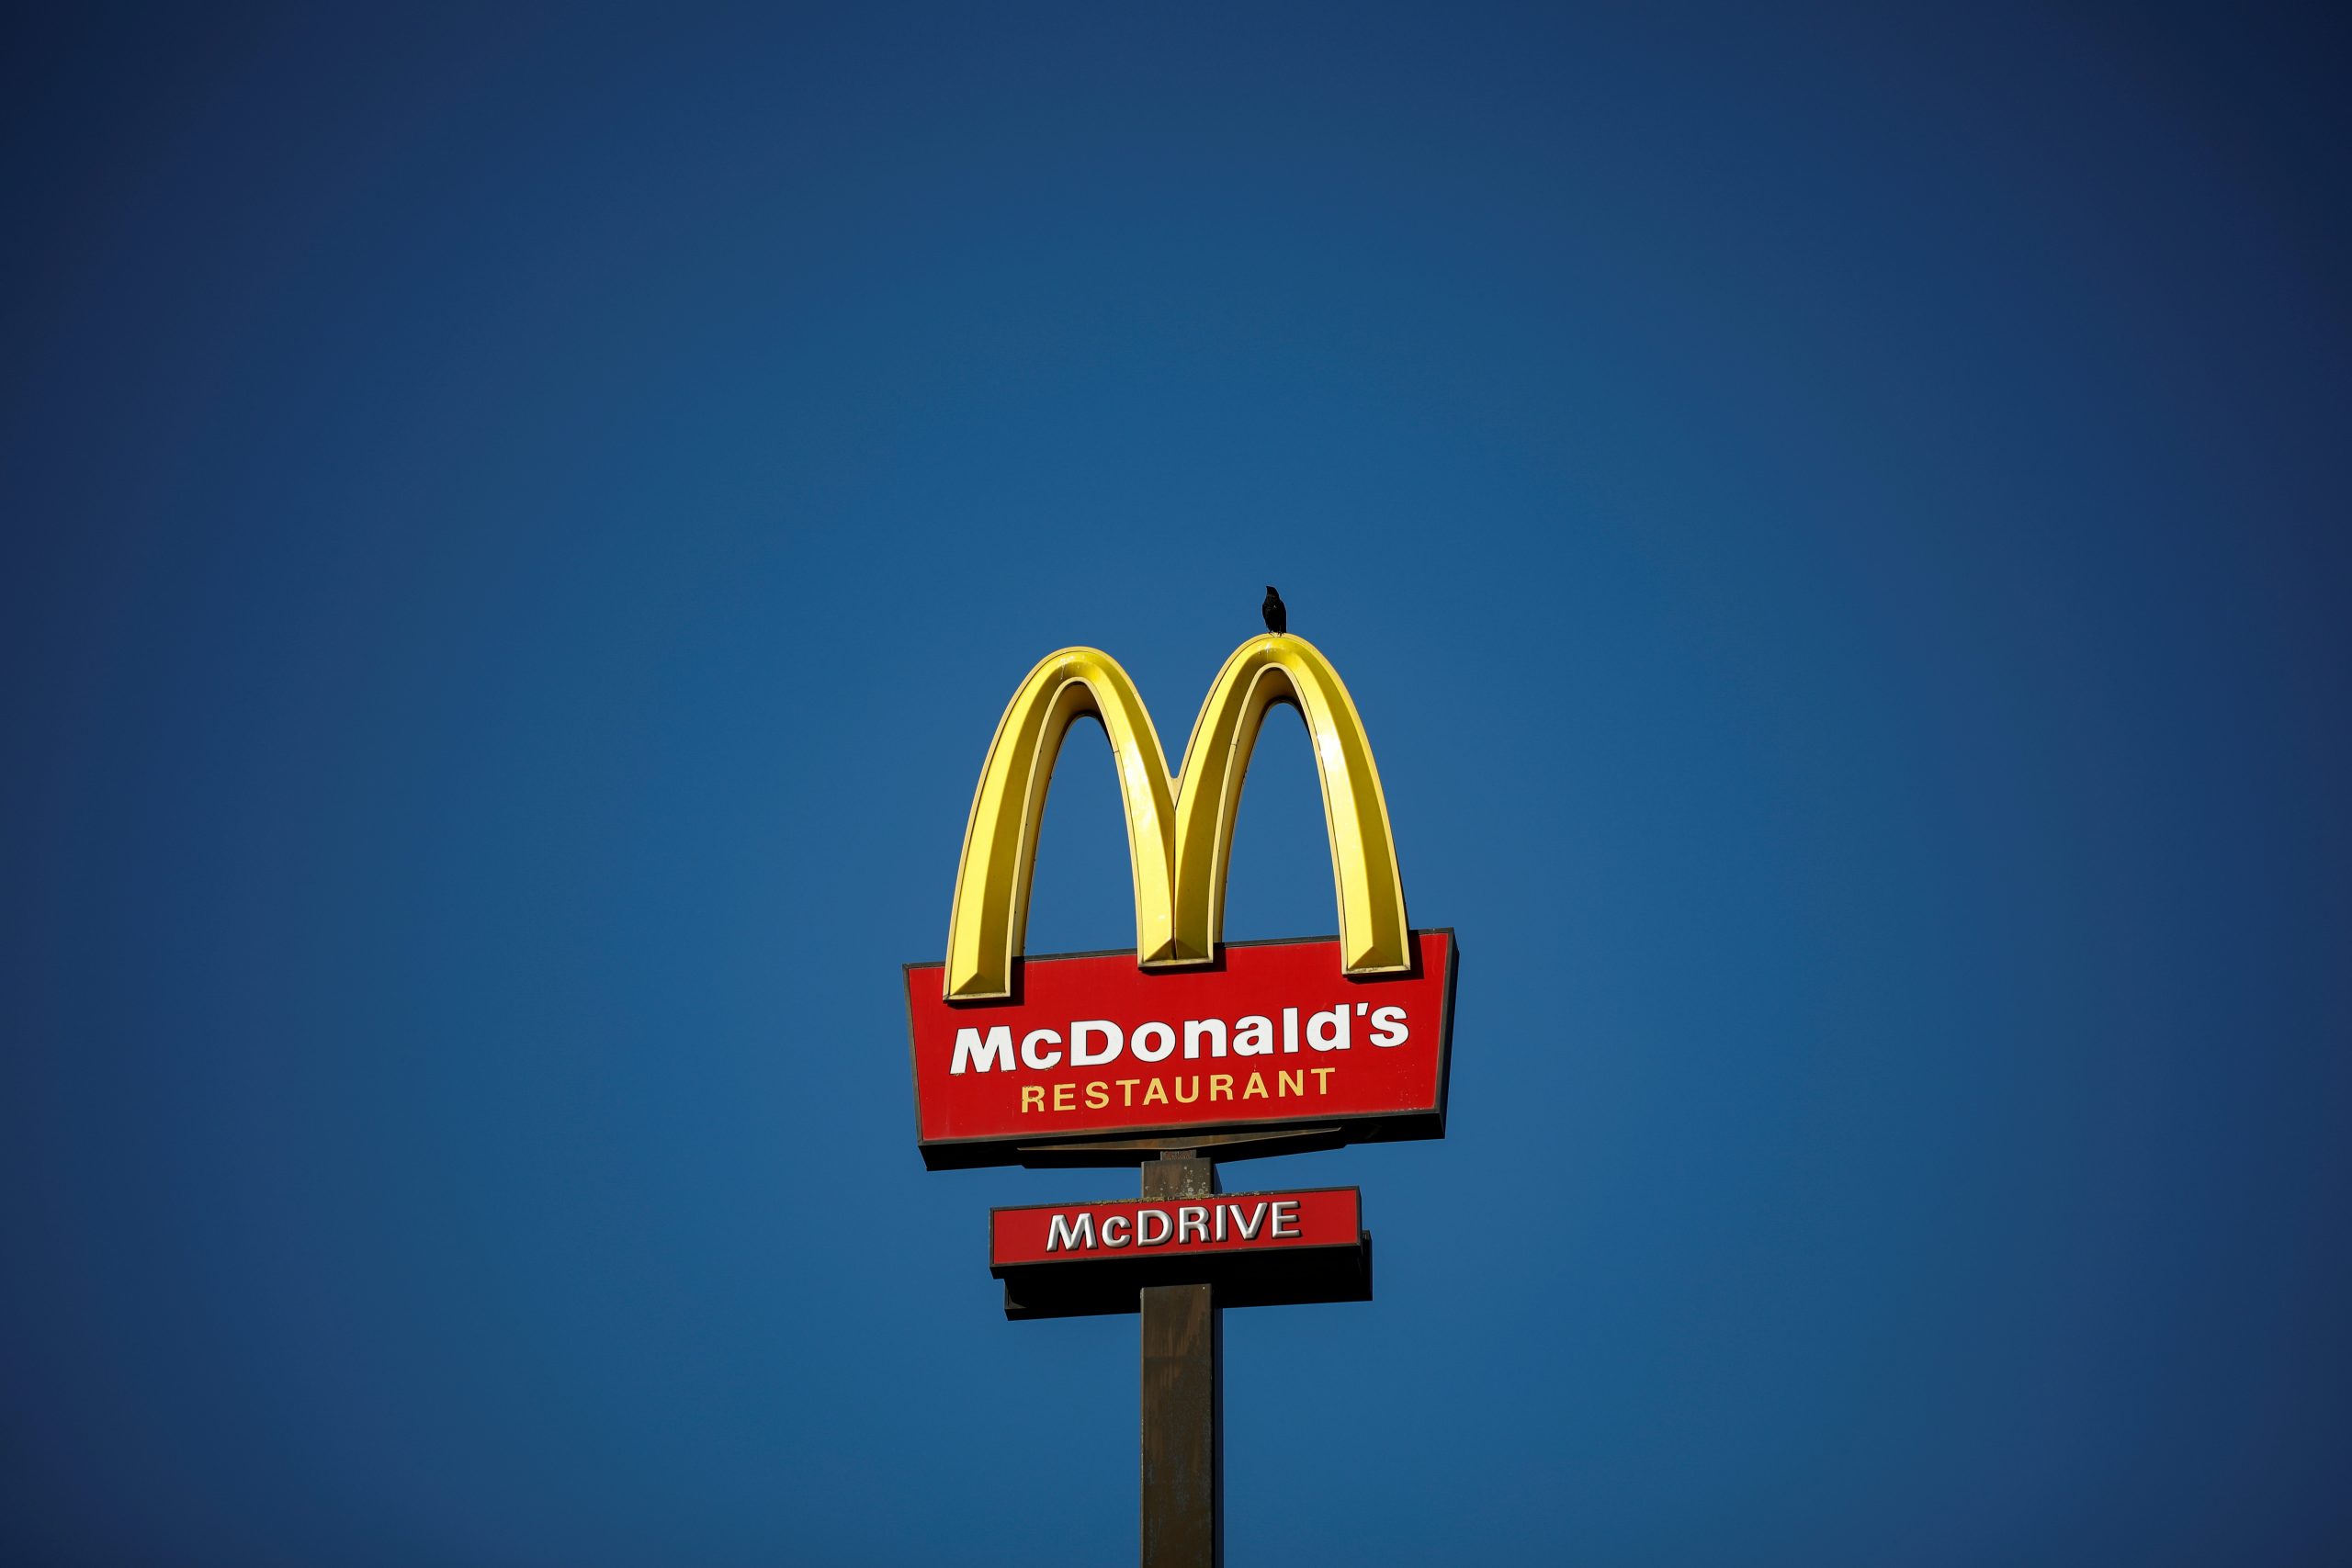 FILE PHOTO: The McDonald's company logo stands on a sign outside a restaurant in Bretigny-sur-Orge, near Paris FILE PHOTO: The McDonald's company logo stands on a sign outside a restaurant in Bretigny-sur-Orge, near Paris, France, July 30, 2020. REUTERS/Benoit Tessier/File Photo  GLOBAL BUSINESS WEEK AHEAD Benoit Tessier